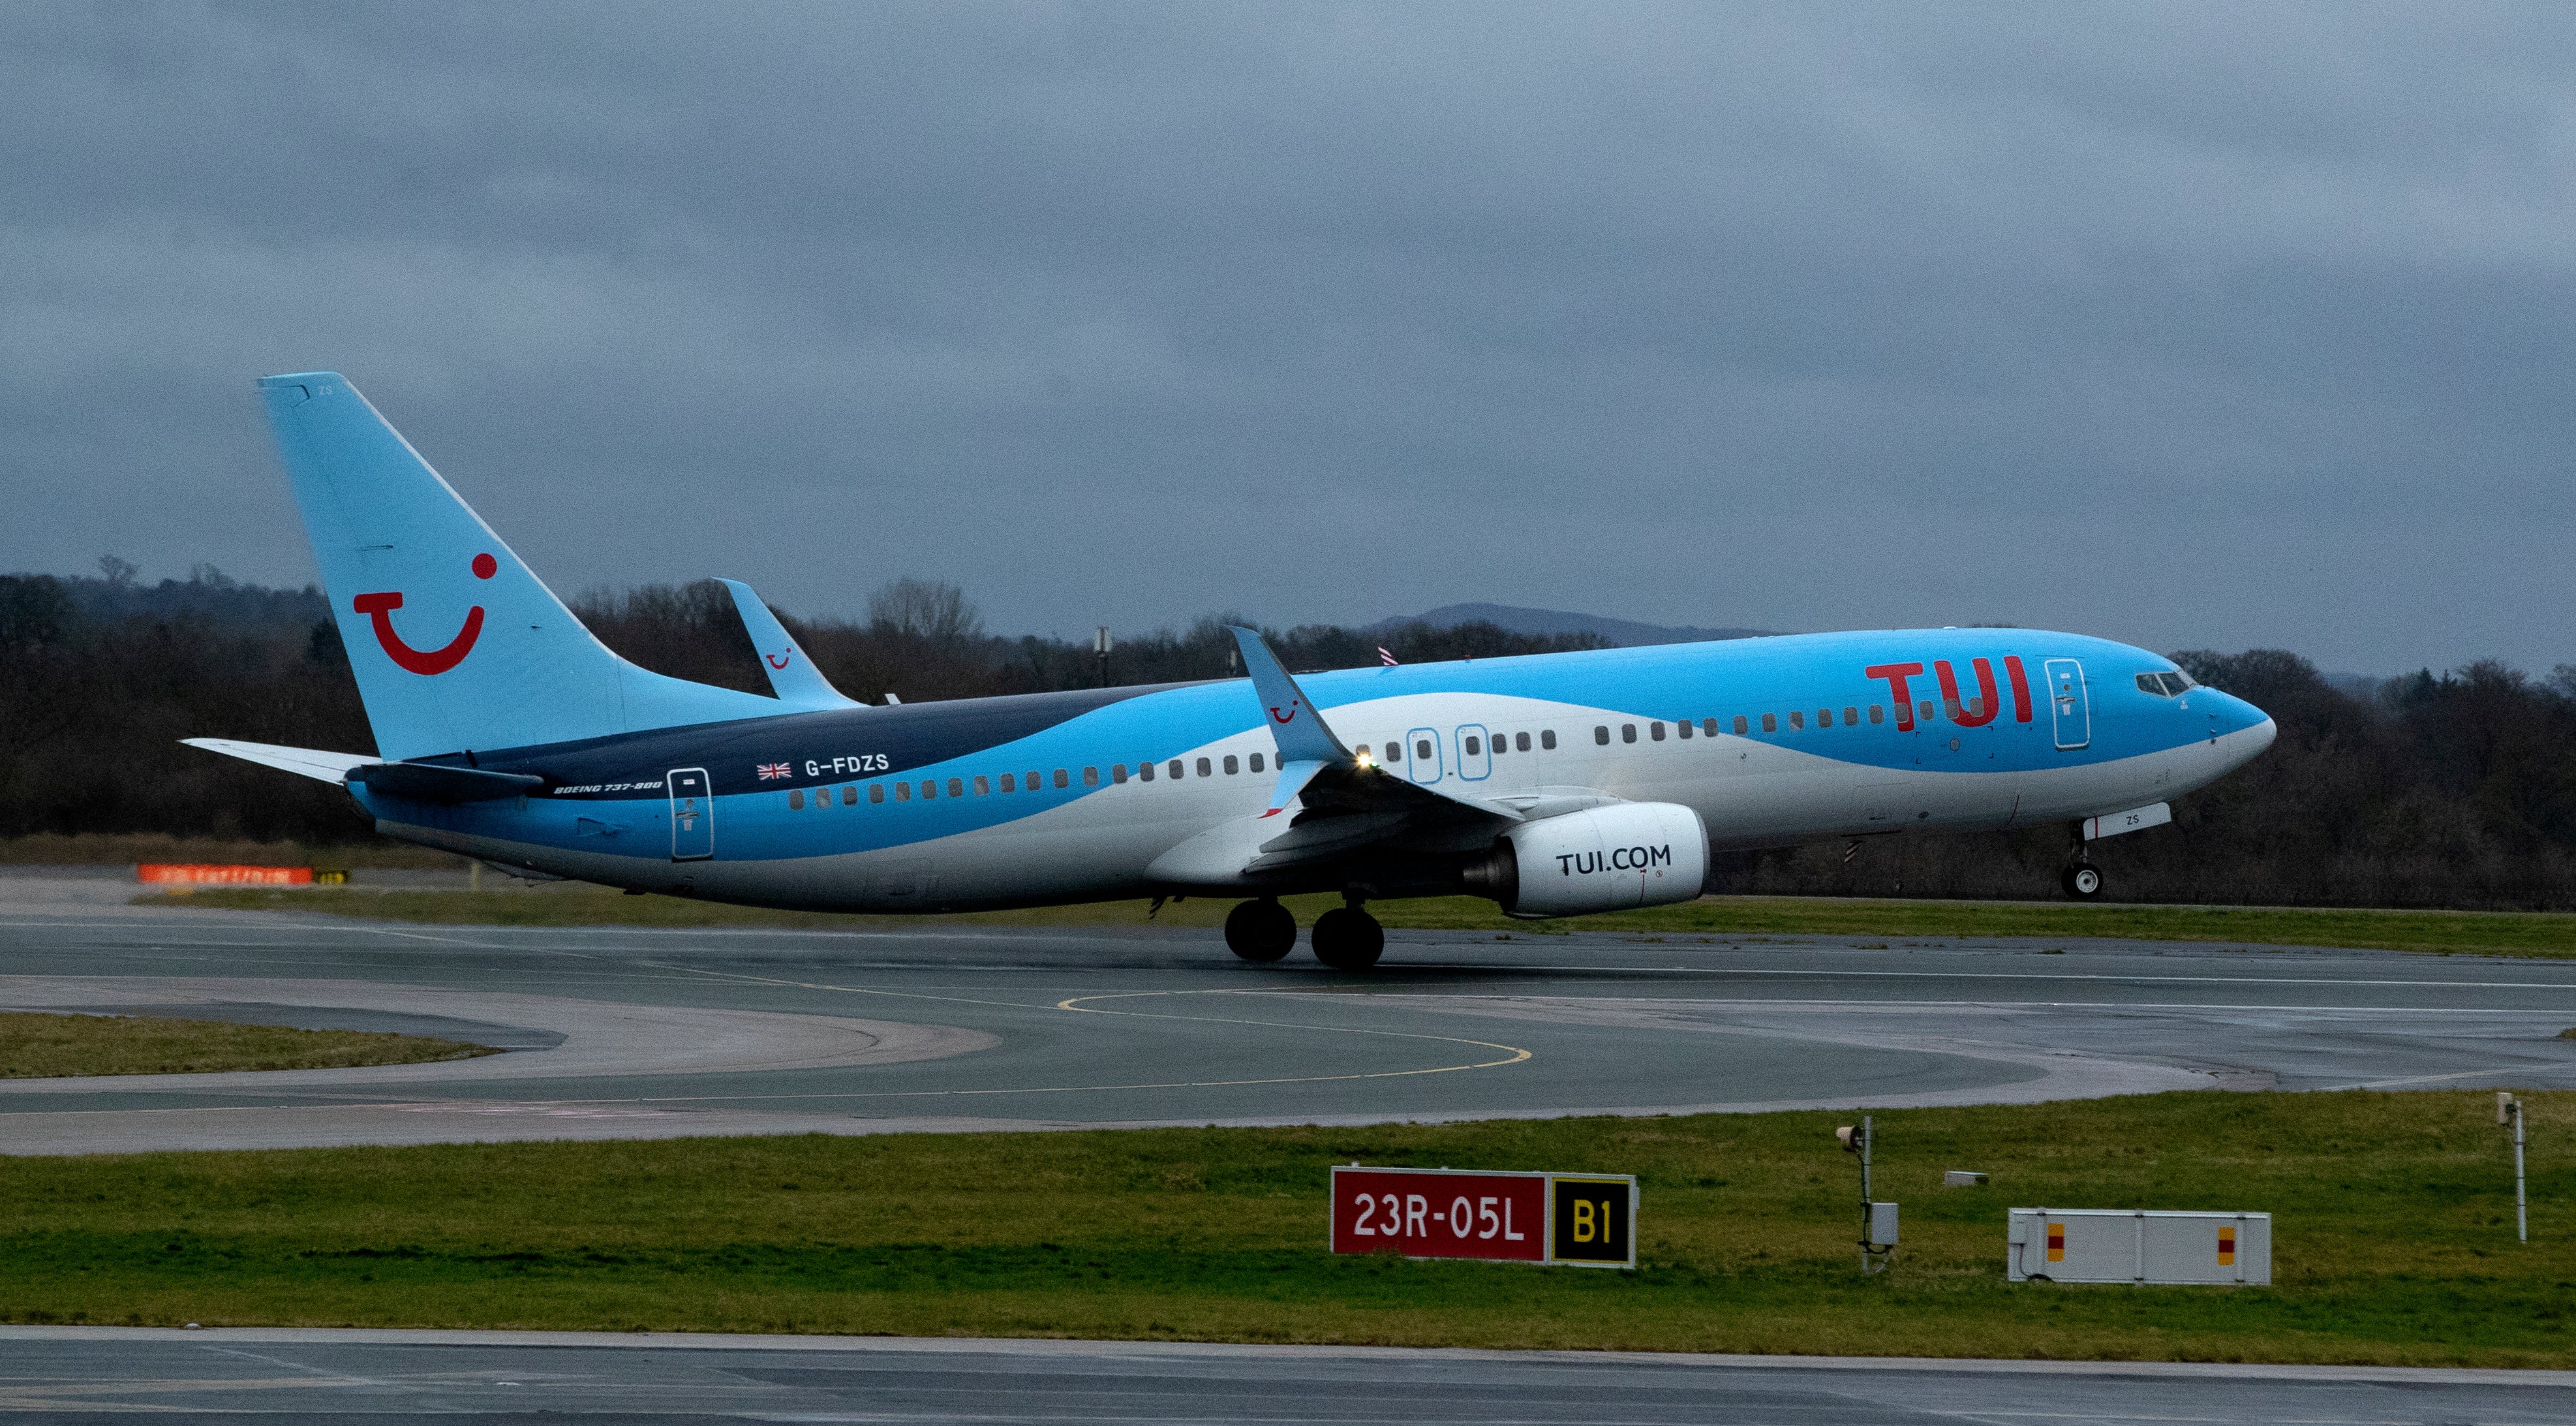 Tui has denied that safety concerns prompted the aborted landing in Bristol